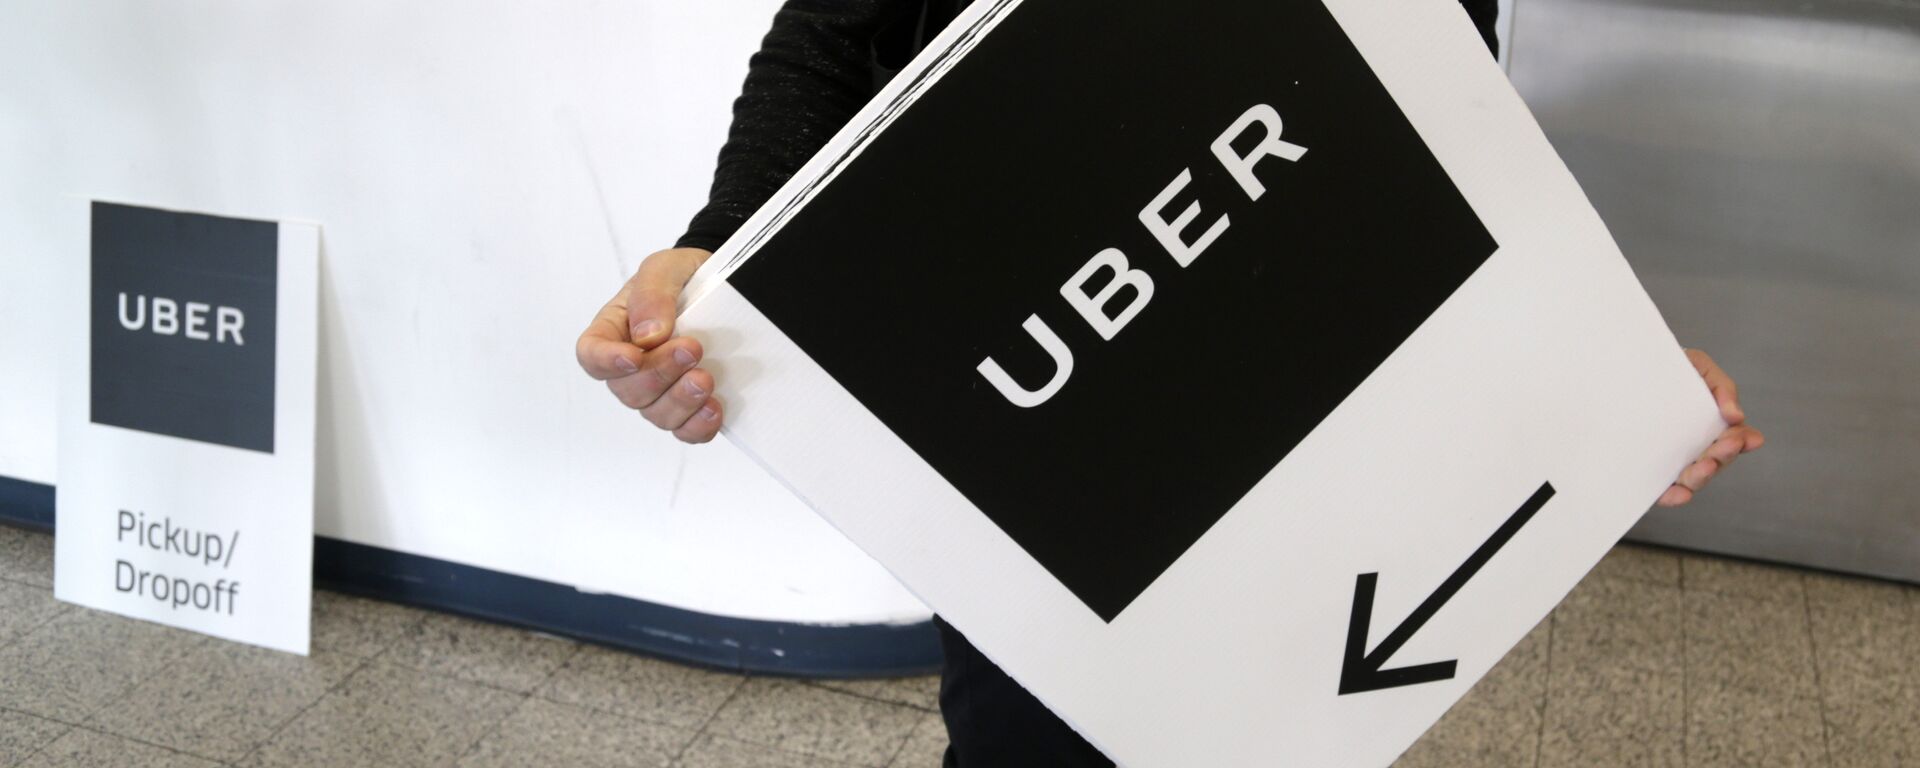 An Uber representative put up signs at LaGuardia Airport in New York, Wednesday, March 15, 2017. - Sputnik International, 1920, 10.11.2021